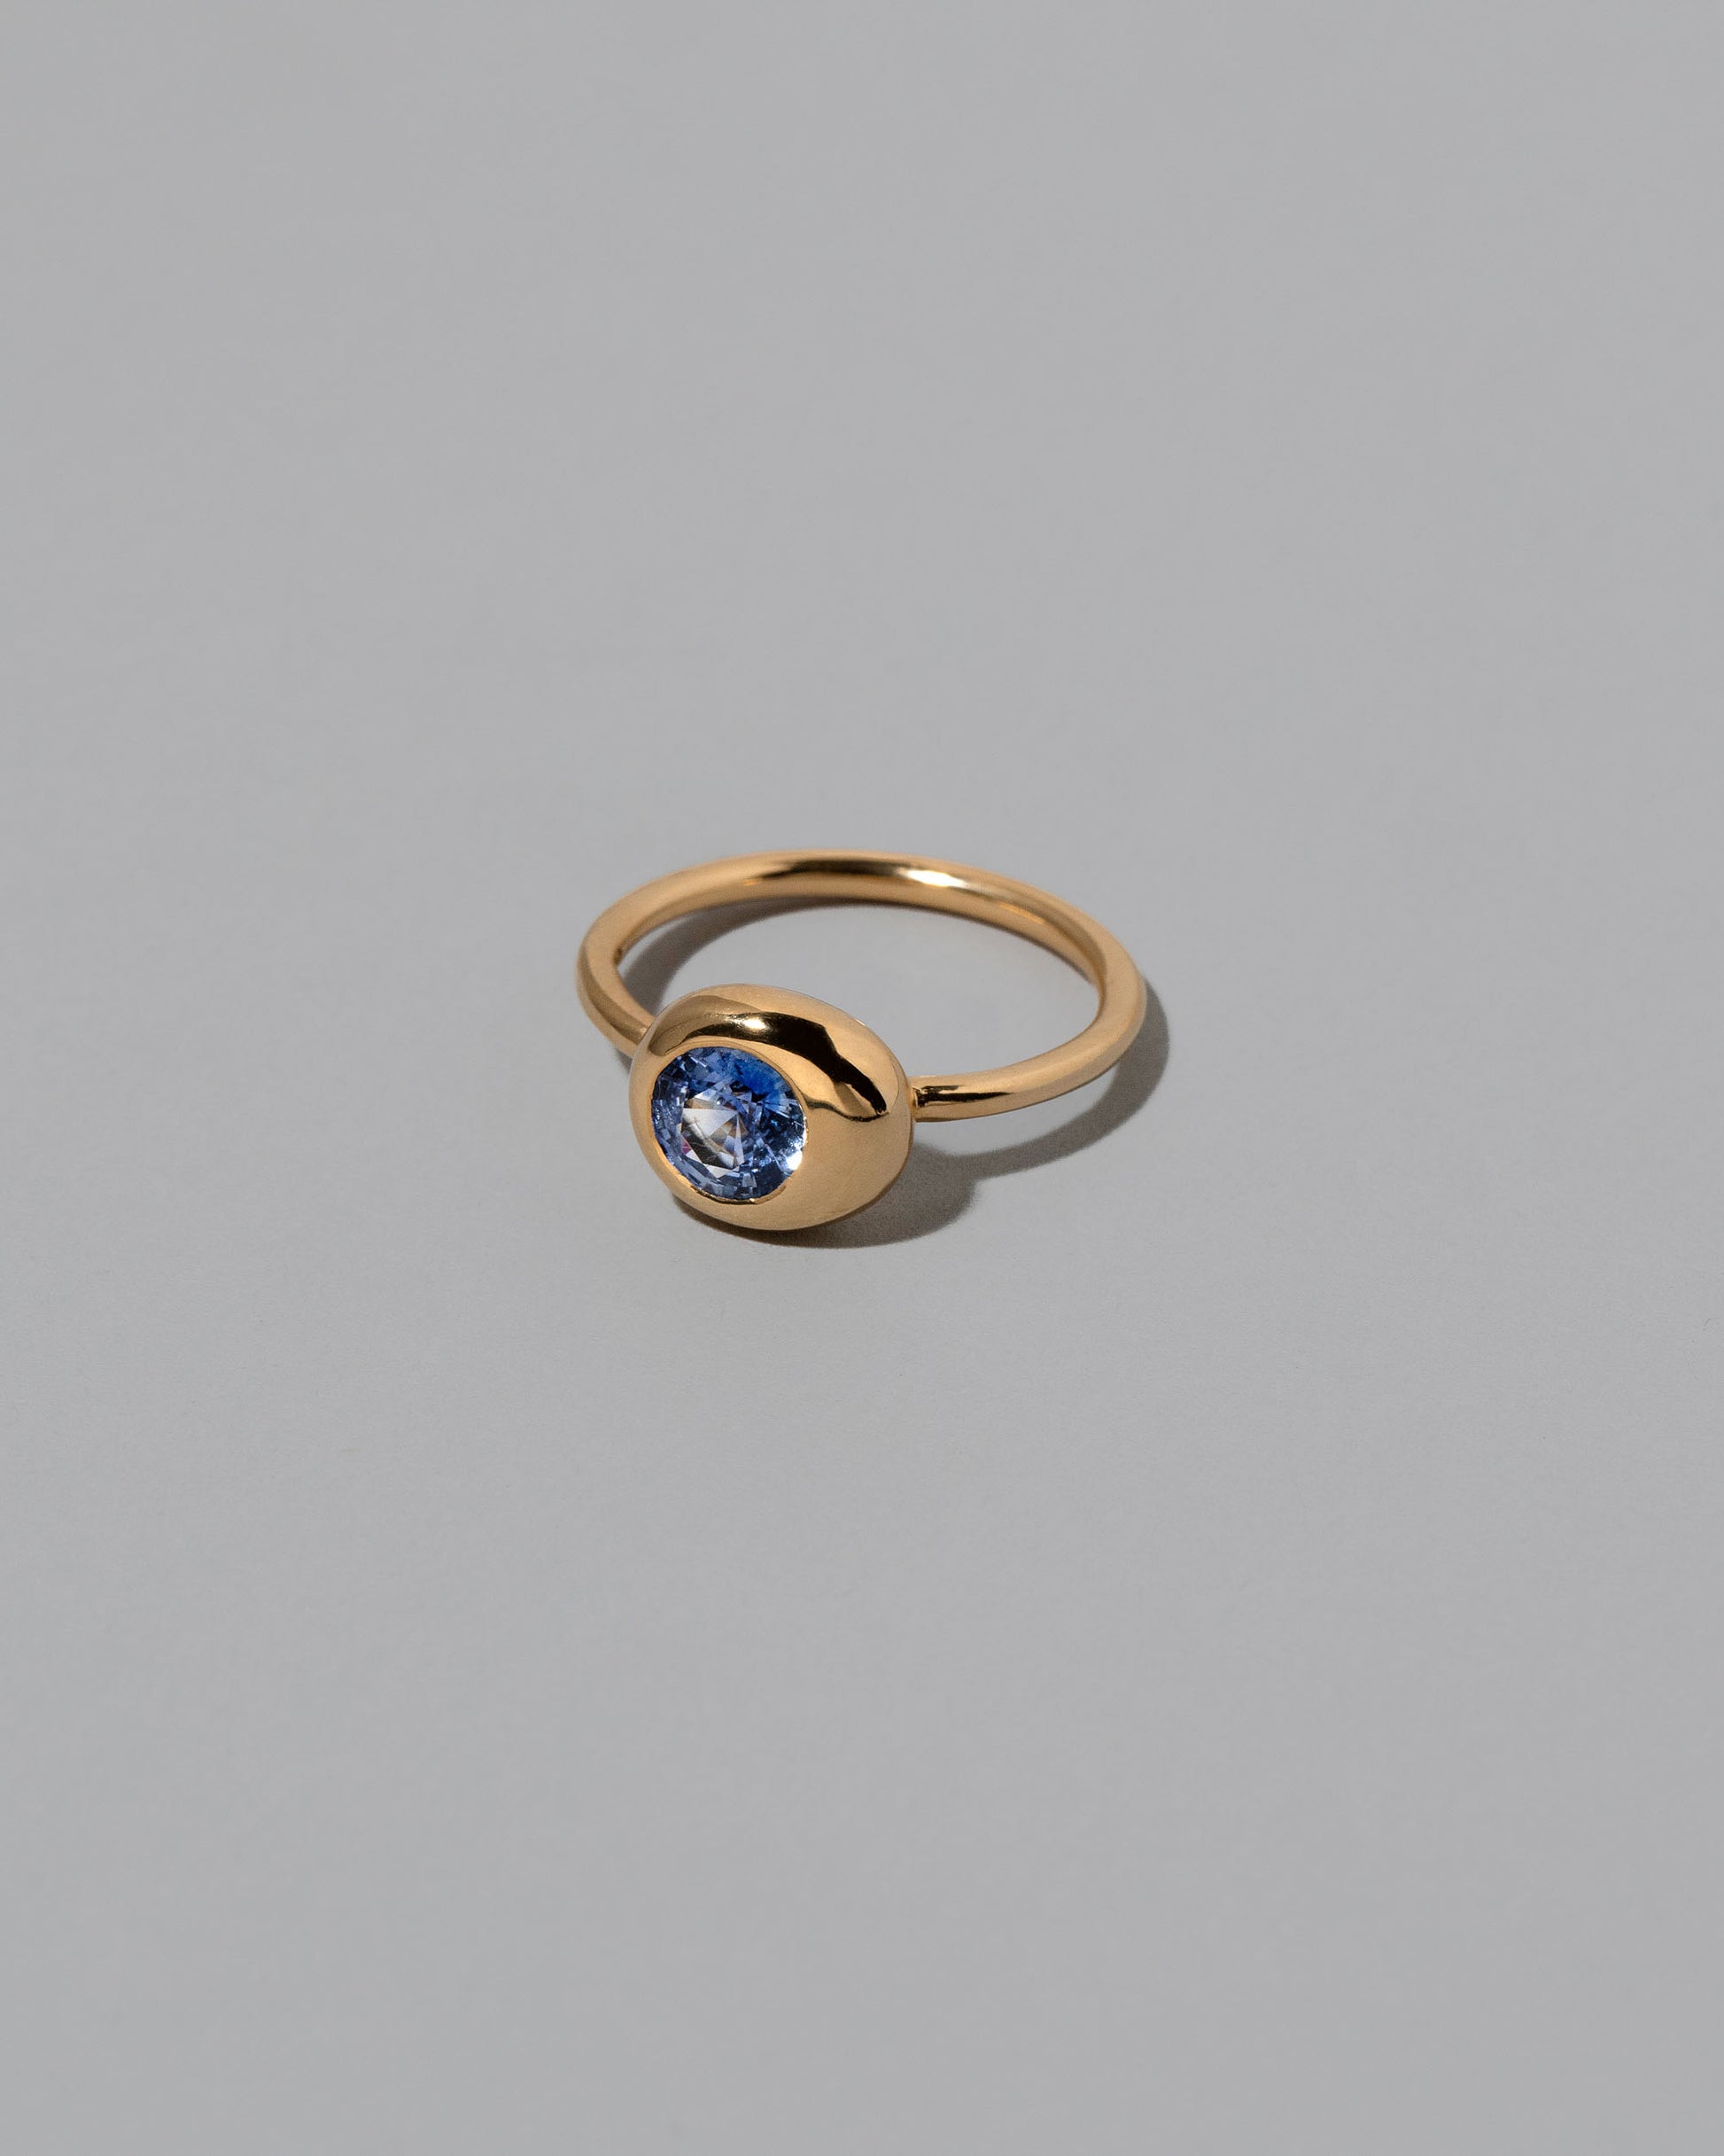 View from the side of the Blue Sapphire Level Ring on light color background.